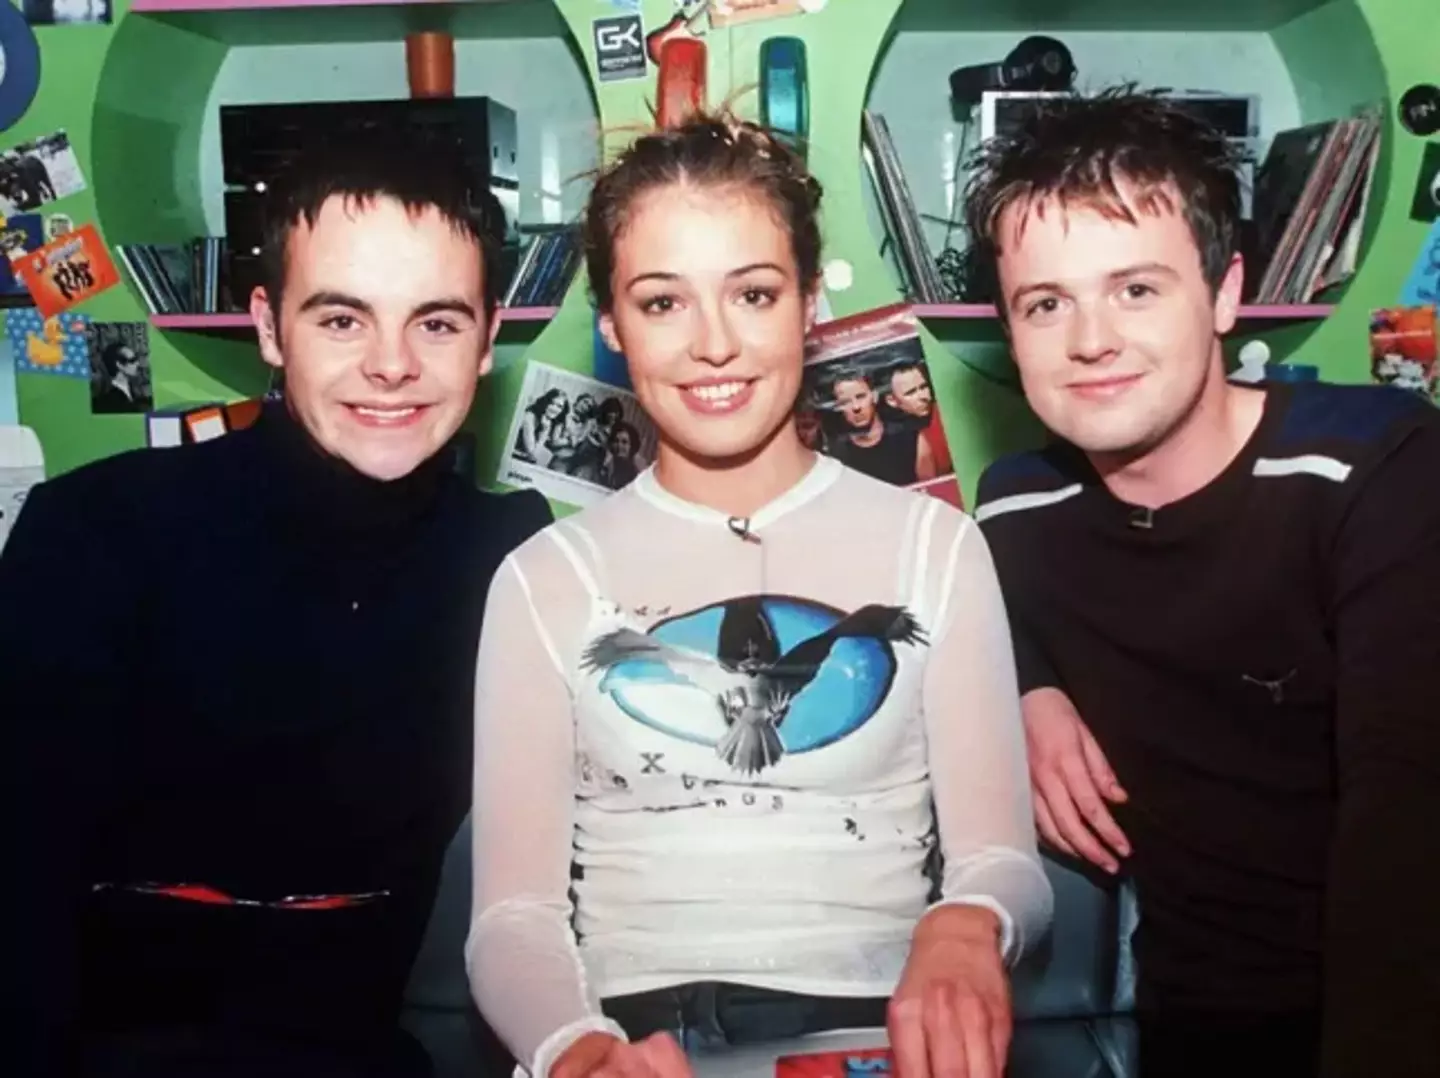 Ant and Dec's first ever TV presenting job was on the ITV children's channel, which was launched back in 2006.